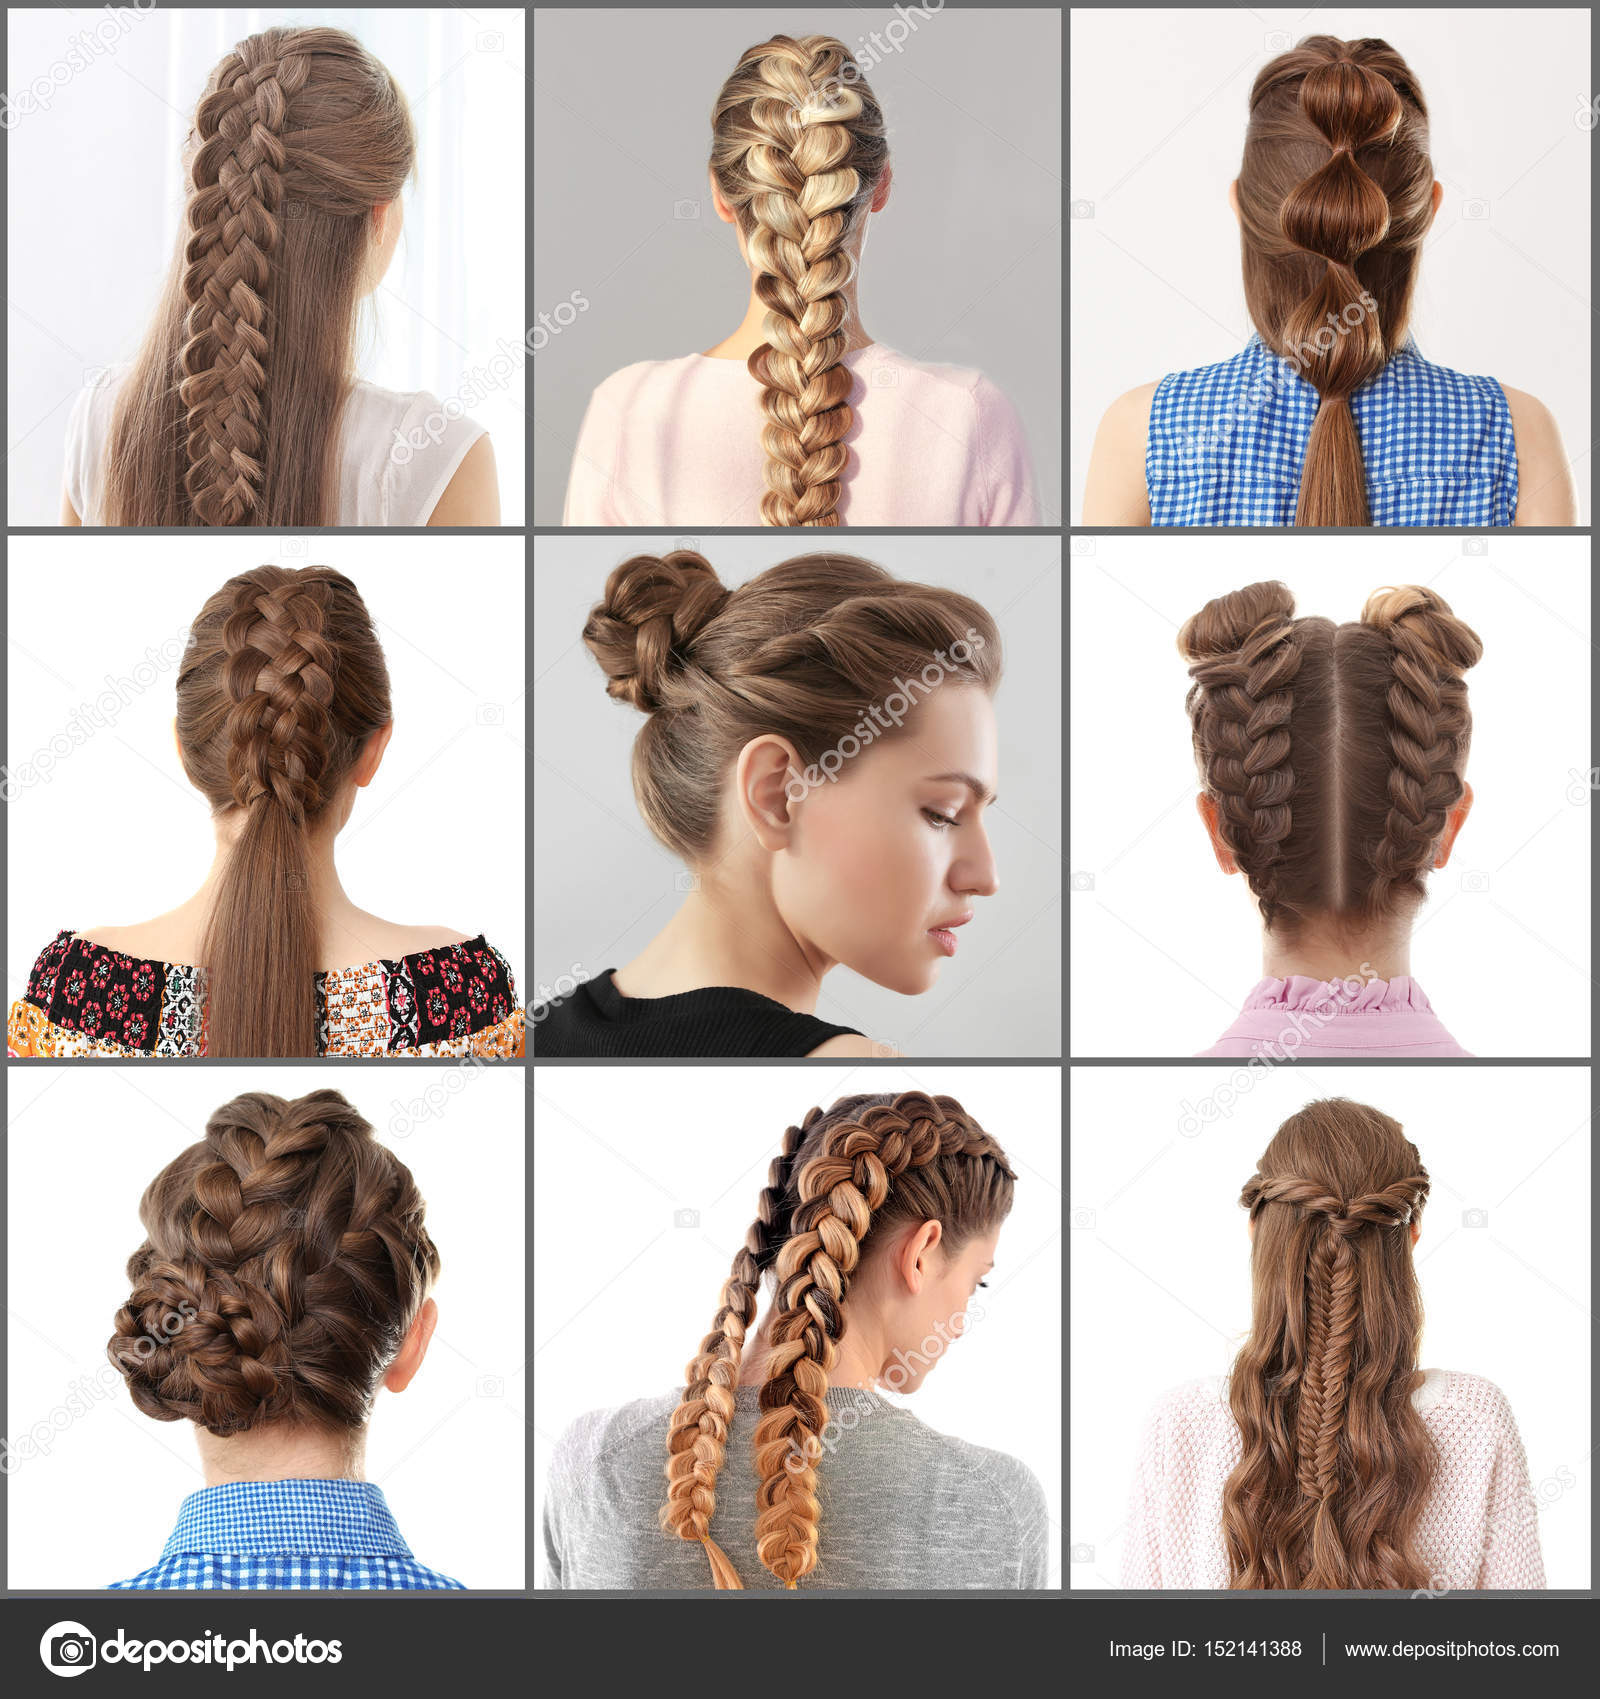 60 Braided Hairstyles for Women Different Types of Braids